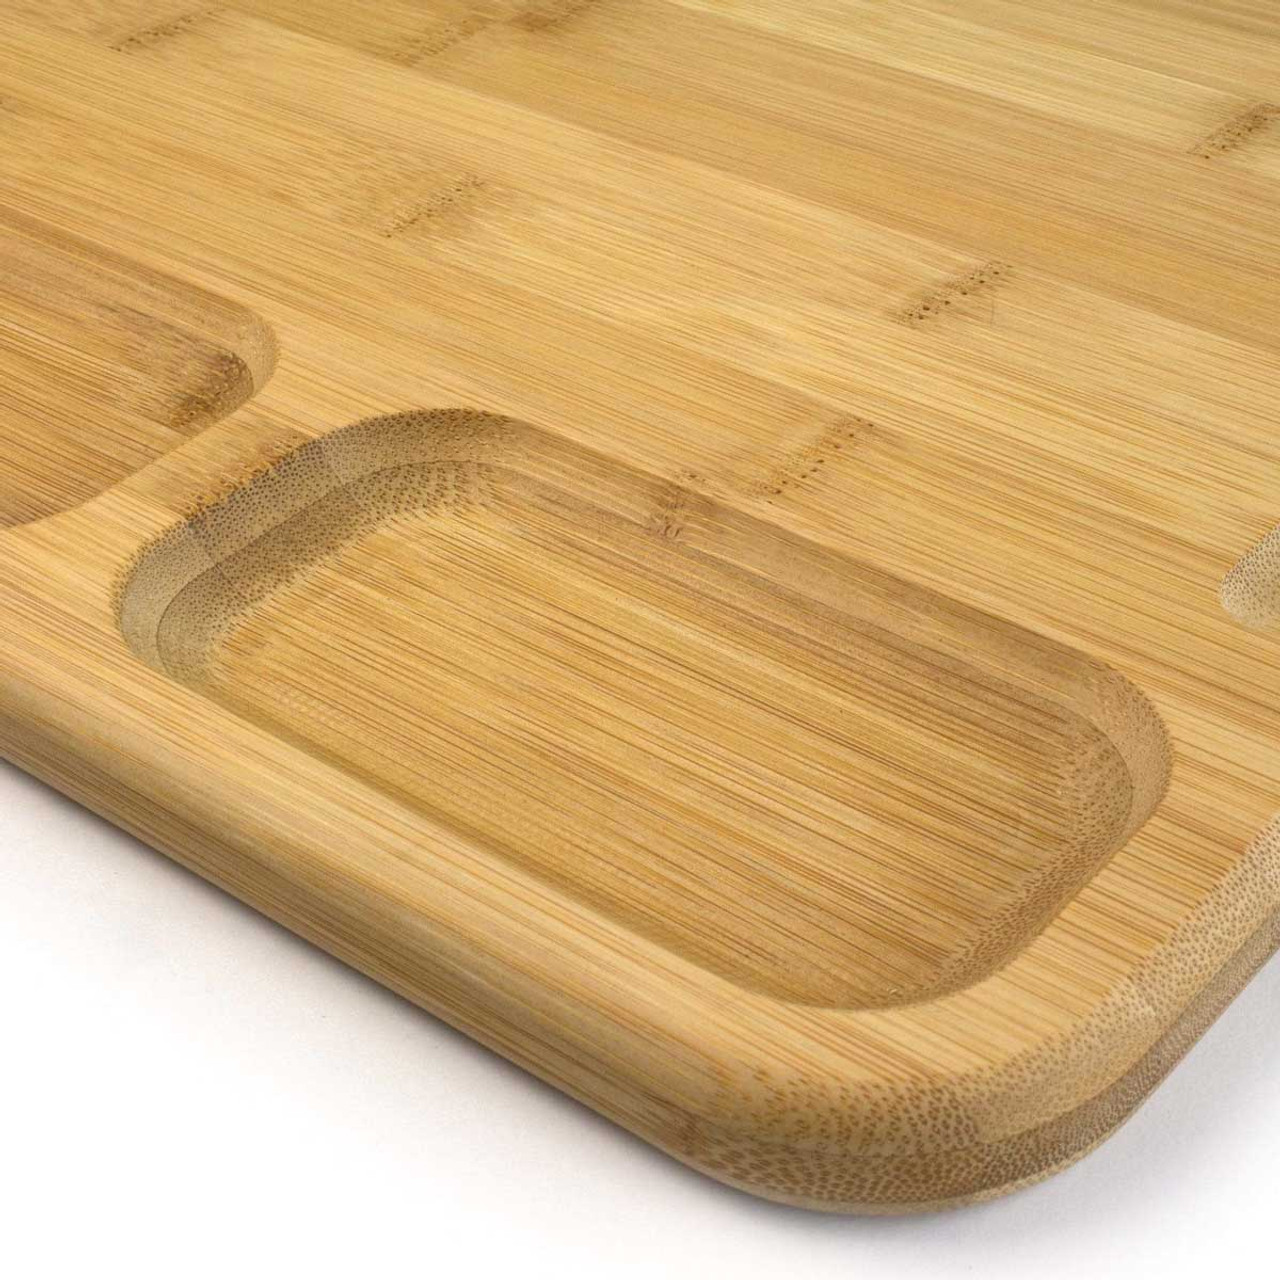 https://cdn11.bigcommerce.com/s-6zwhmb4rdr/images/stencil/1280x1280/products/71961/192168/the-lamp-stand-totally-bamboo-3-well-kitchen-prep-cutting-board-with-juice-groove-20-3011-3__44115.1636528473.jpg?c=1